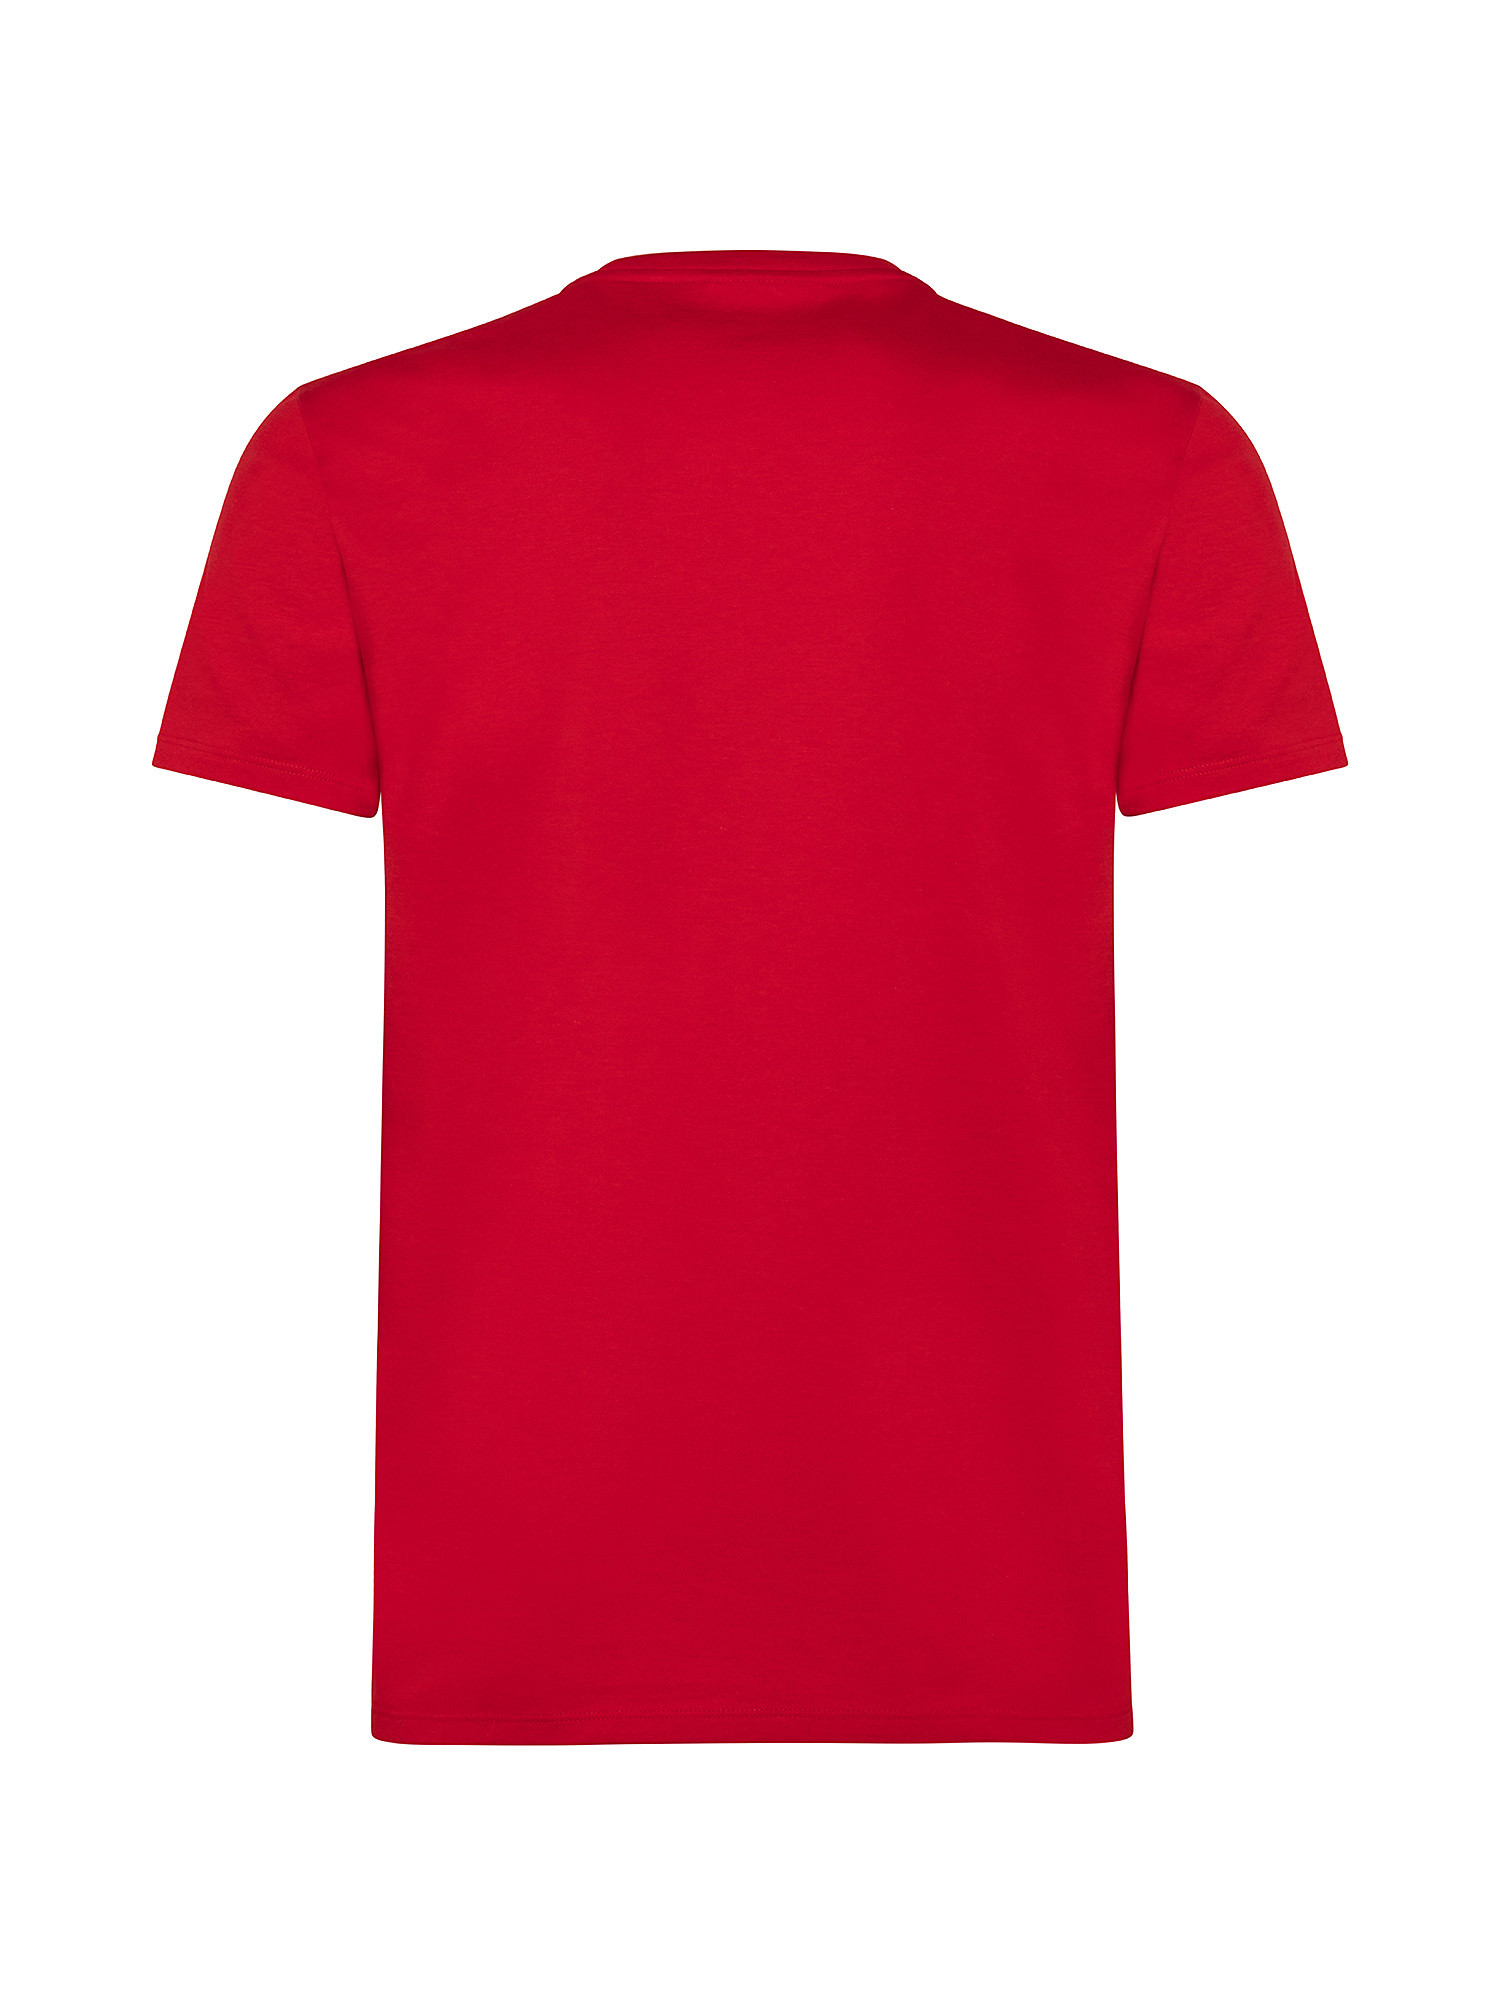 T-shirt, Rosso, large